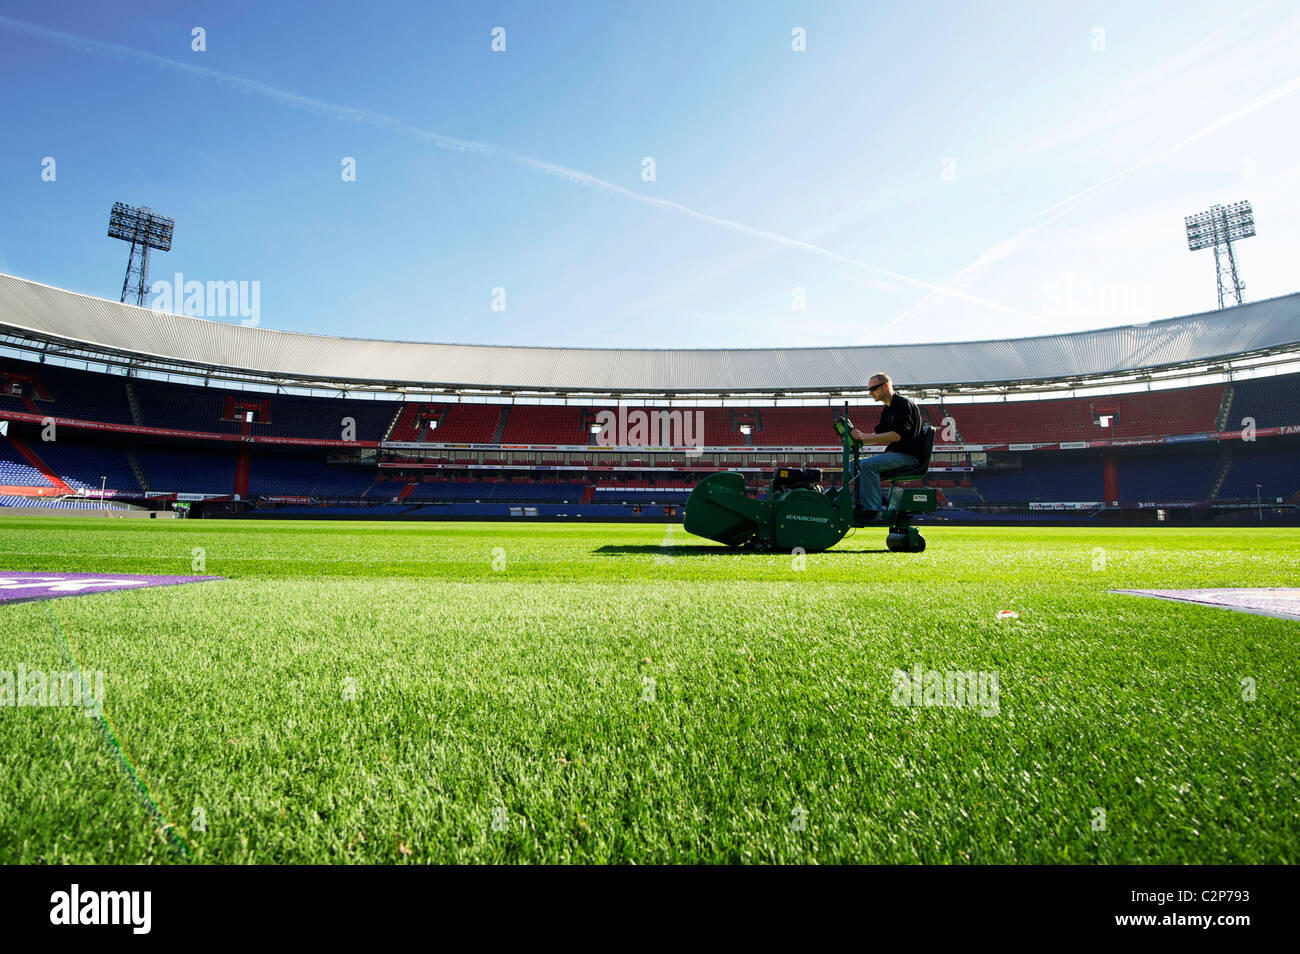 HOLLAND-ROTTERDAM-Groundsman at work at football stadium 'De Kuip', home of Feyenoord. The pitch is the best in Holland. Stock Photo